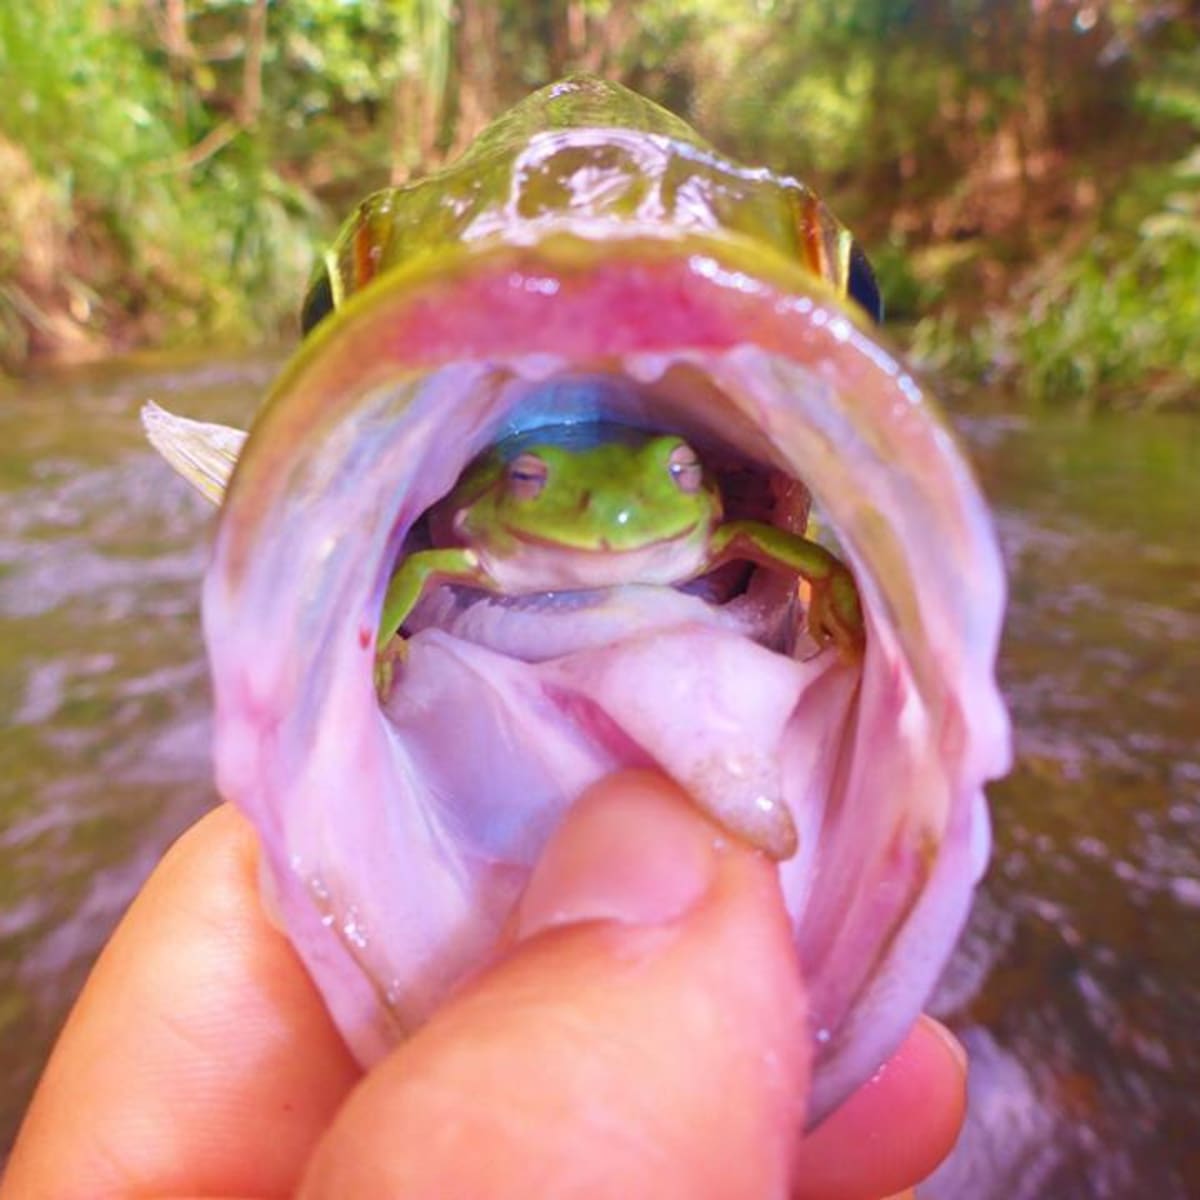 Fisherman discovers live frog in throat of fish - Men's Journal